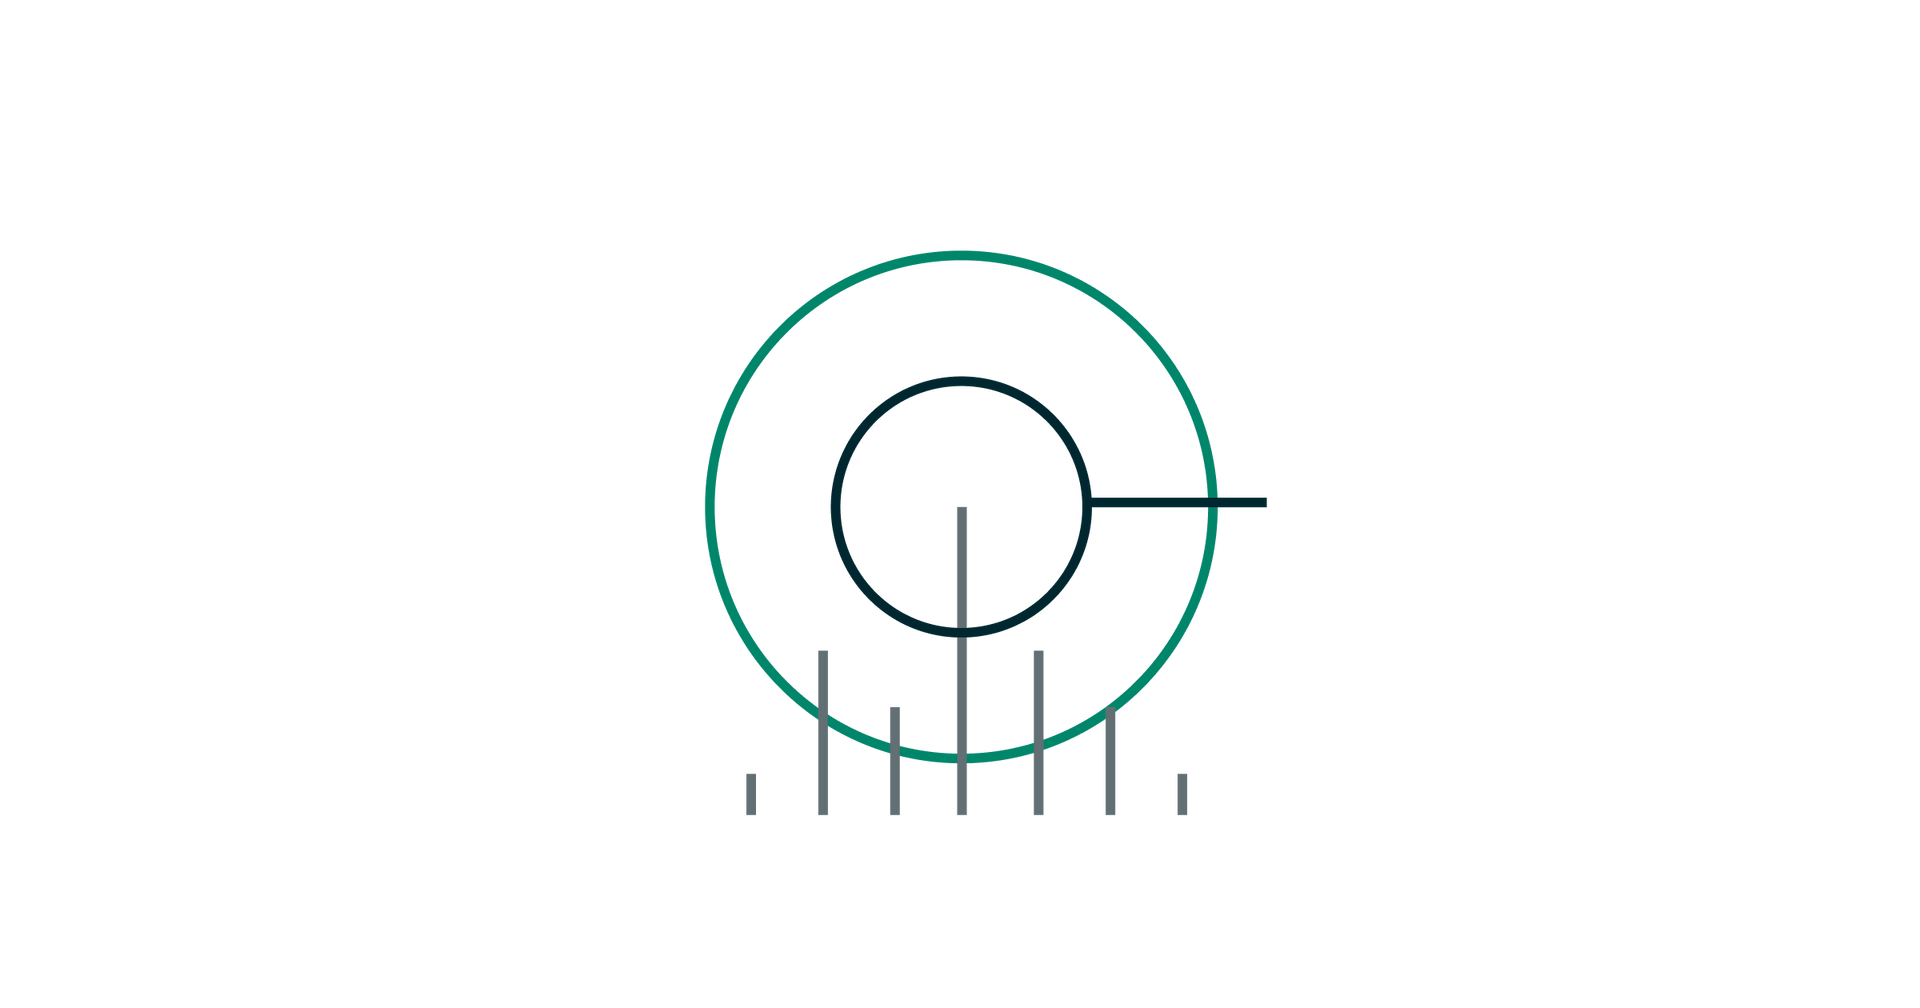 A transparent black circle, encircled by another circle, in front of vertical lines representing what is business observability